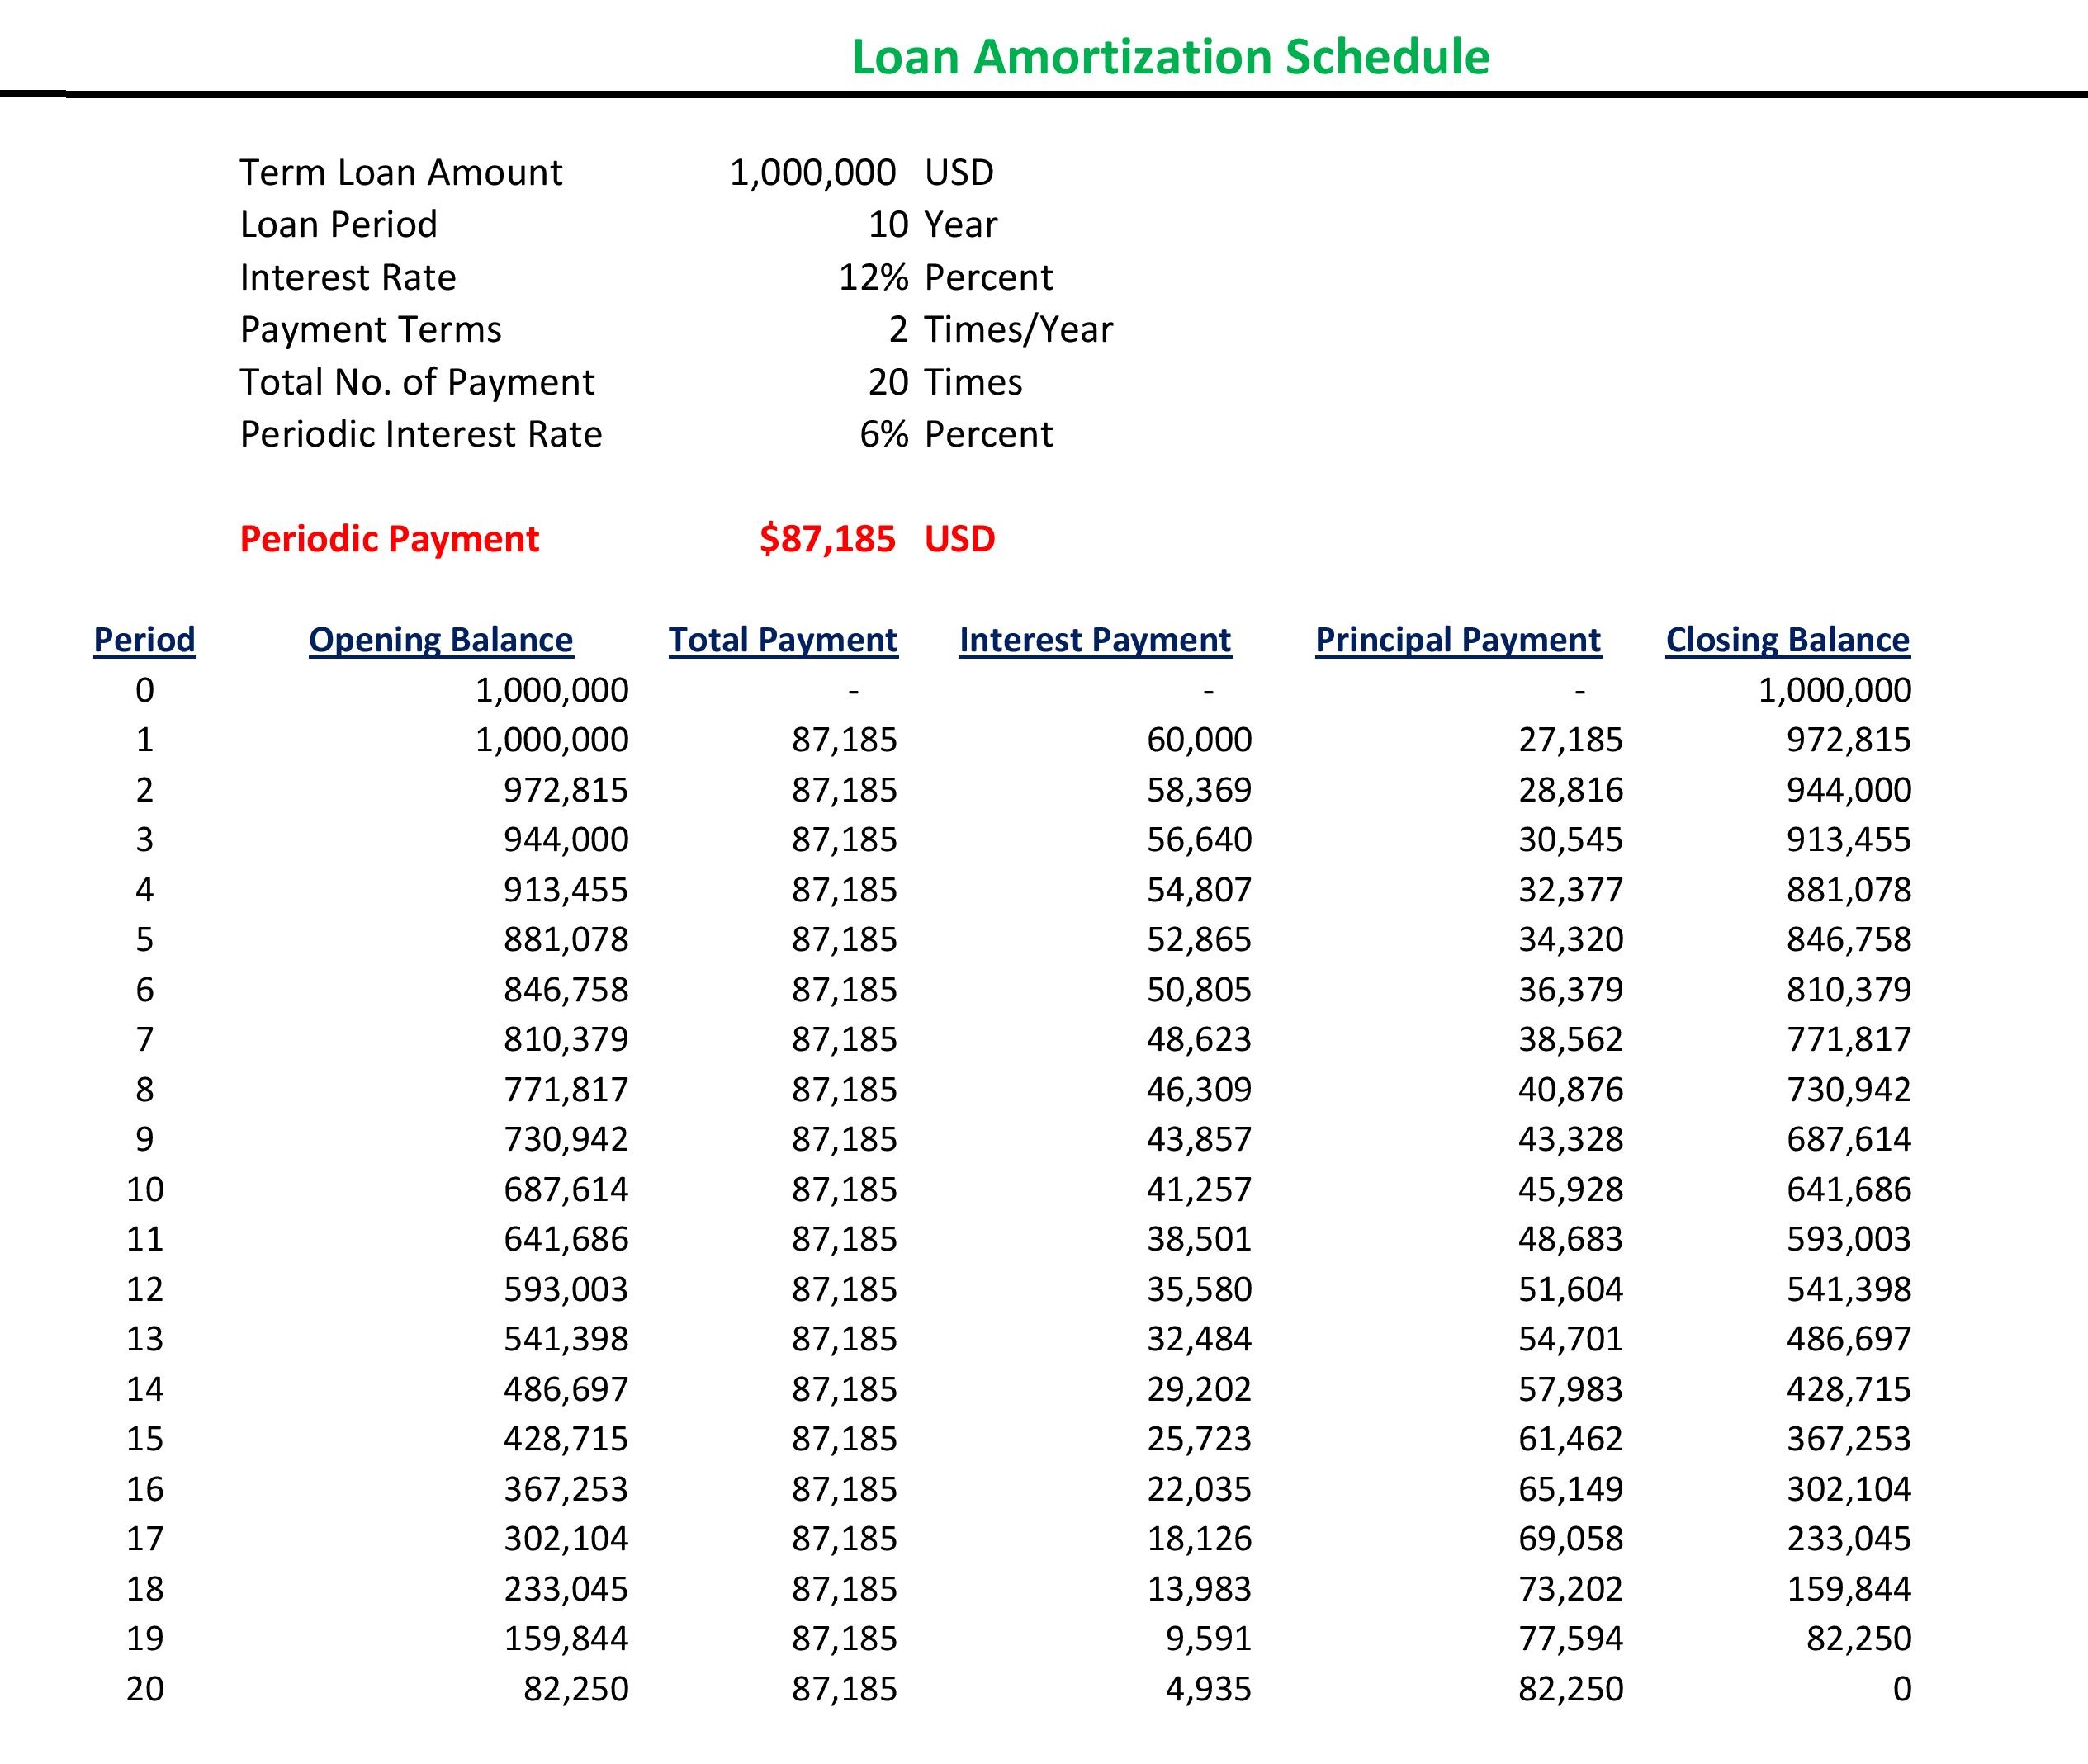 How to Make Loan Amortization Schedule in Excel - ORDNUR